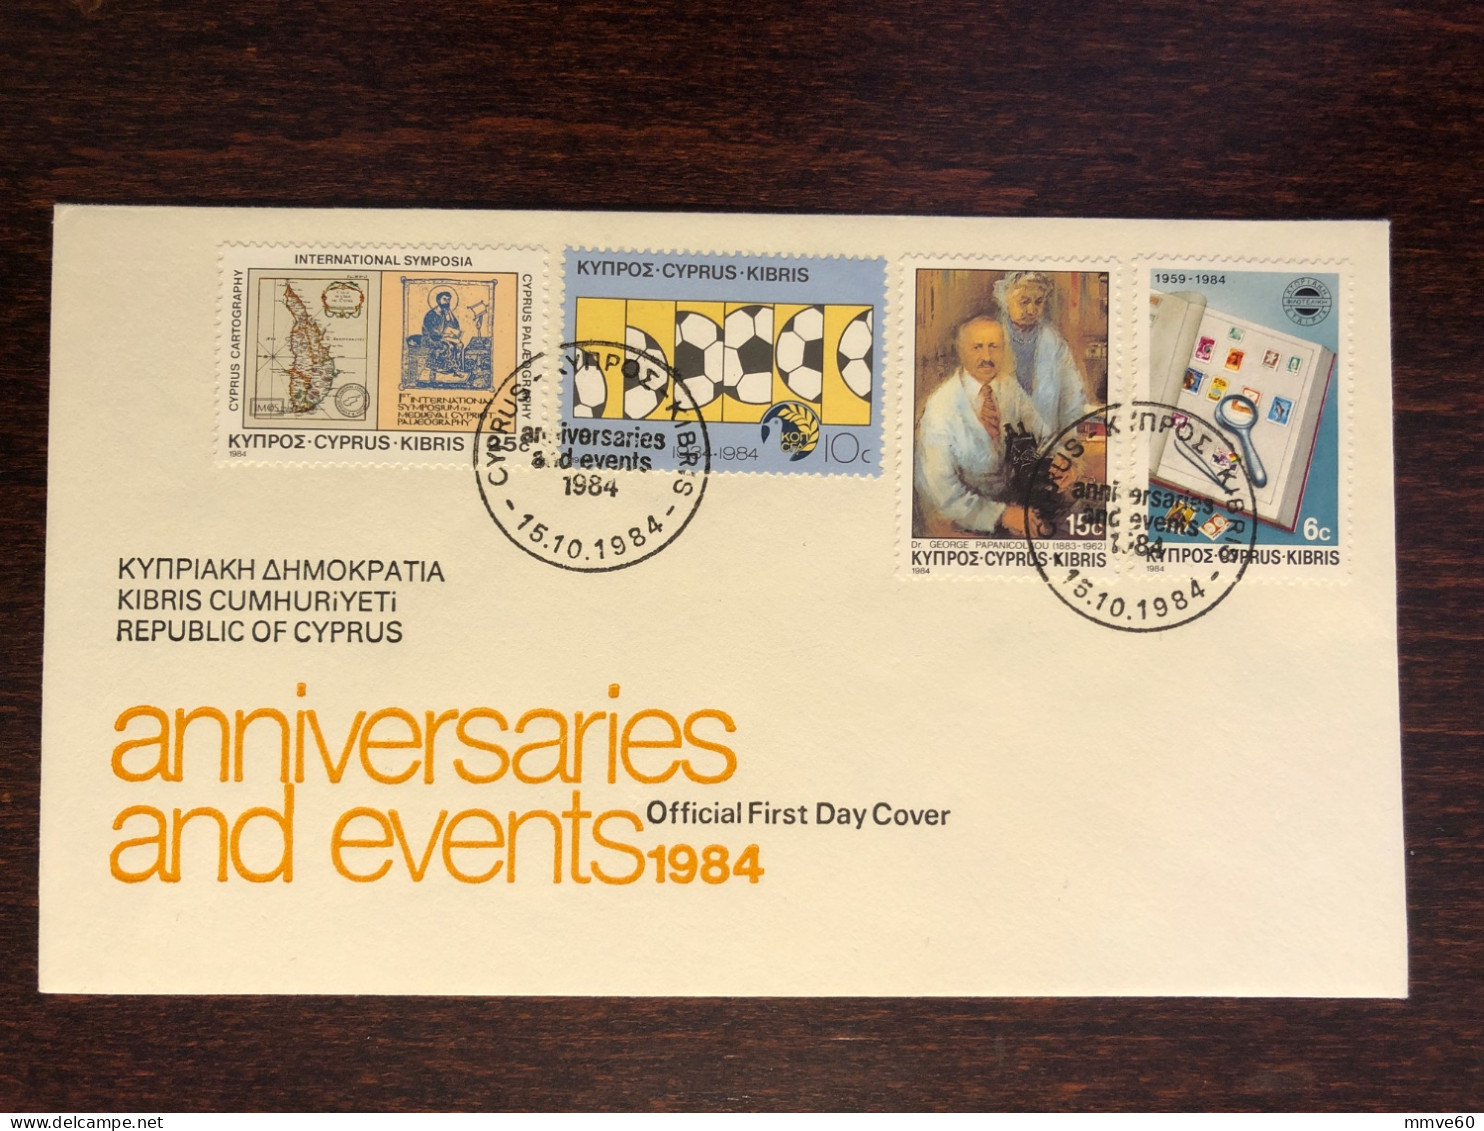 CYPRUS FDC COVER 1984 YEAR PAPANICOLAU ONCOLOGY CANCER HEALTH MEDICINE STAMPS - Cartas